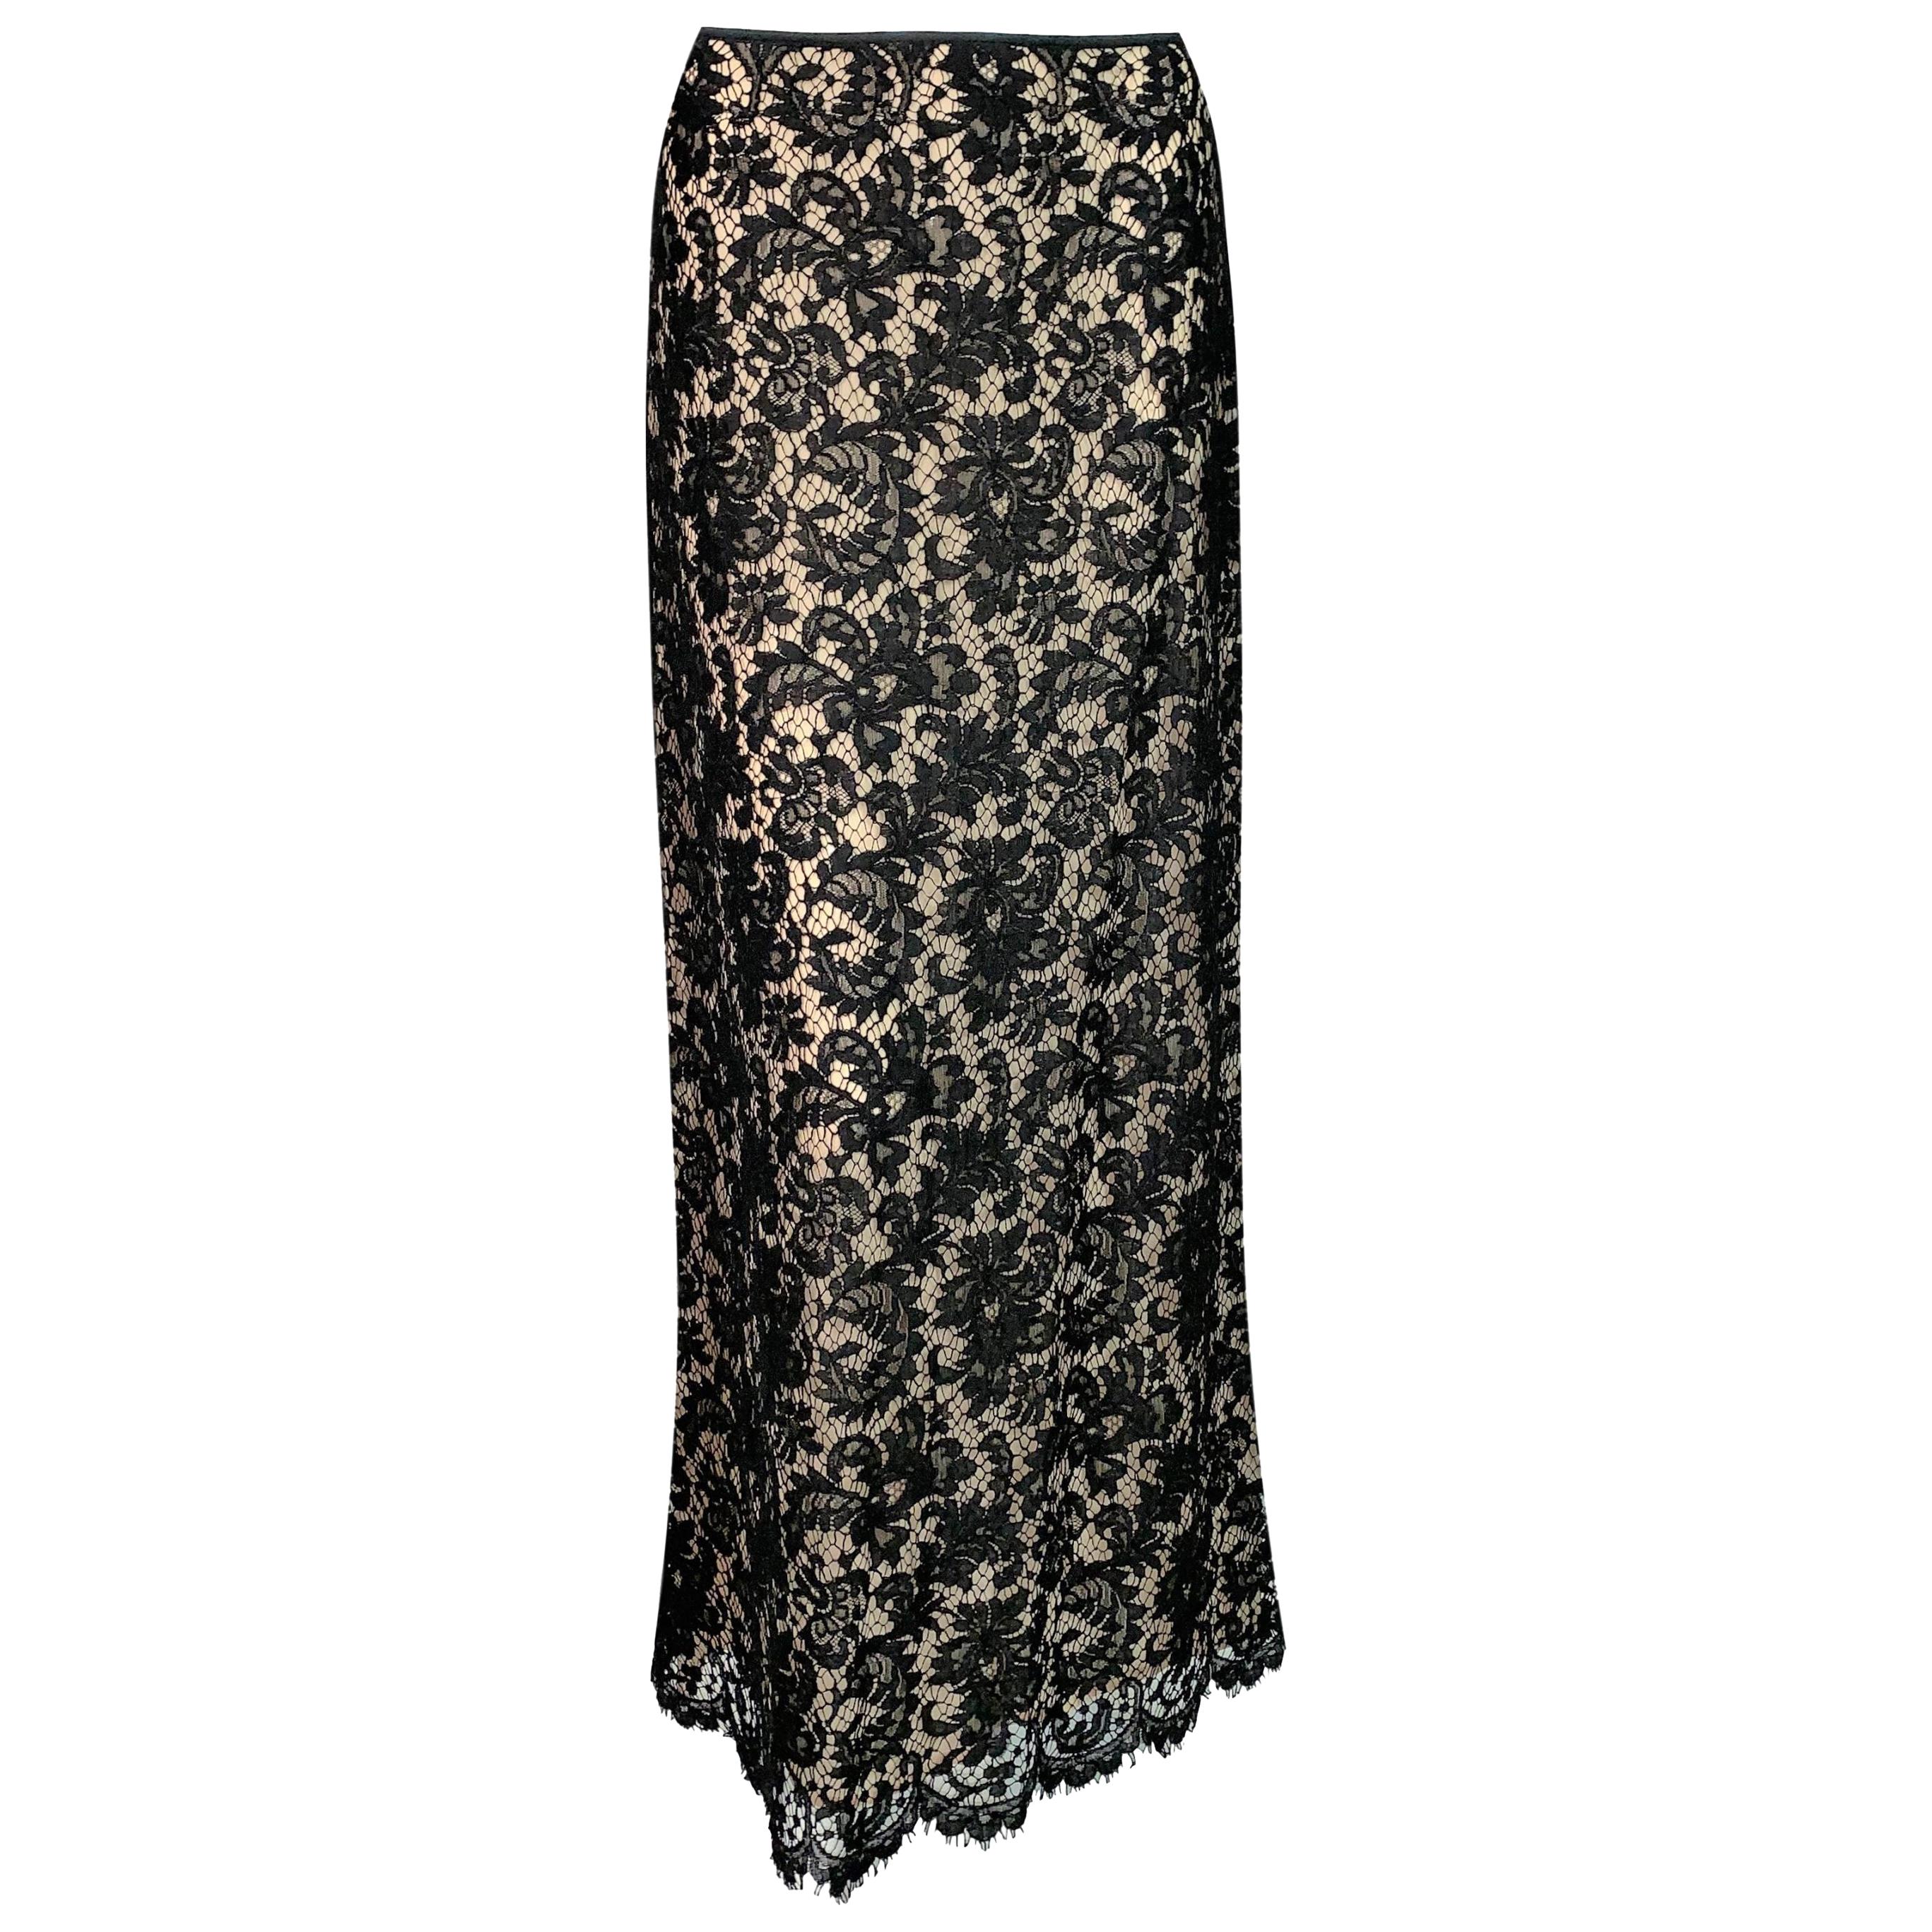 S/S 1996 Gucci by Tom Ford Black Lace Long Skirt